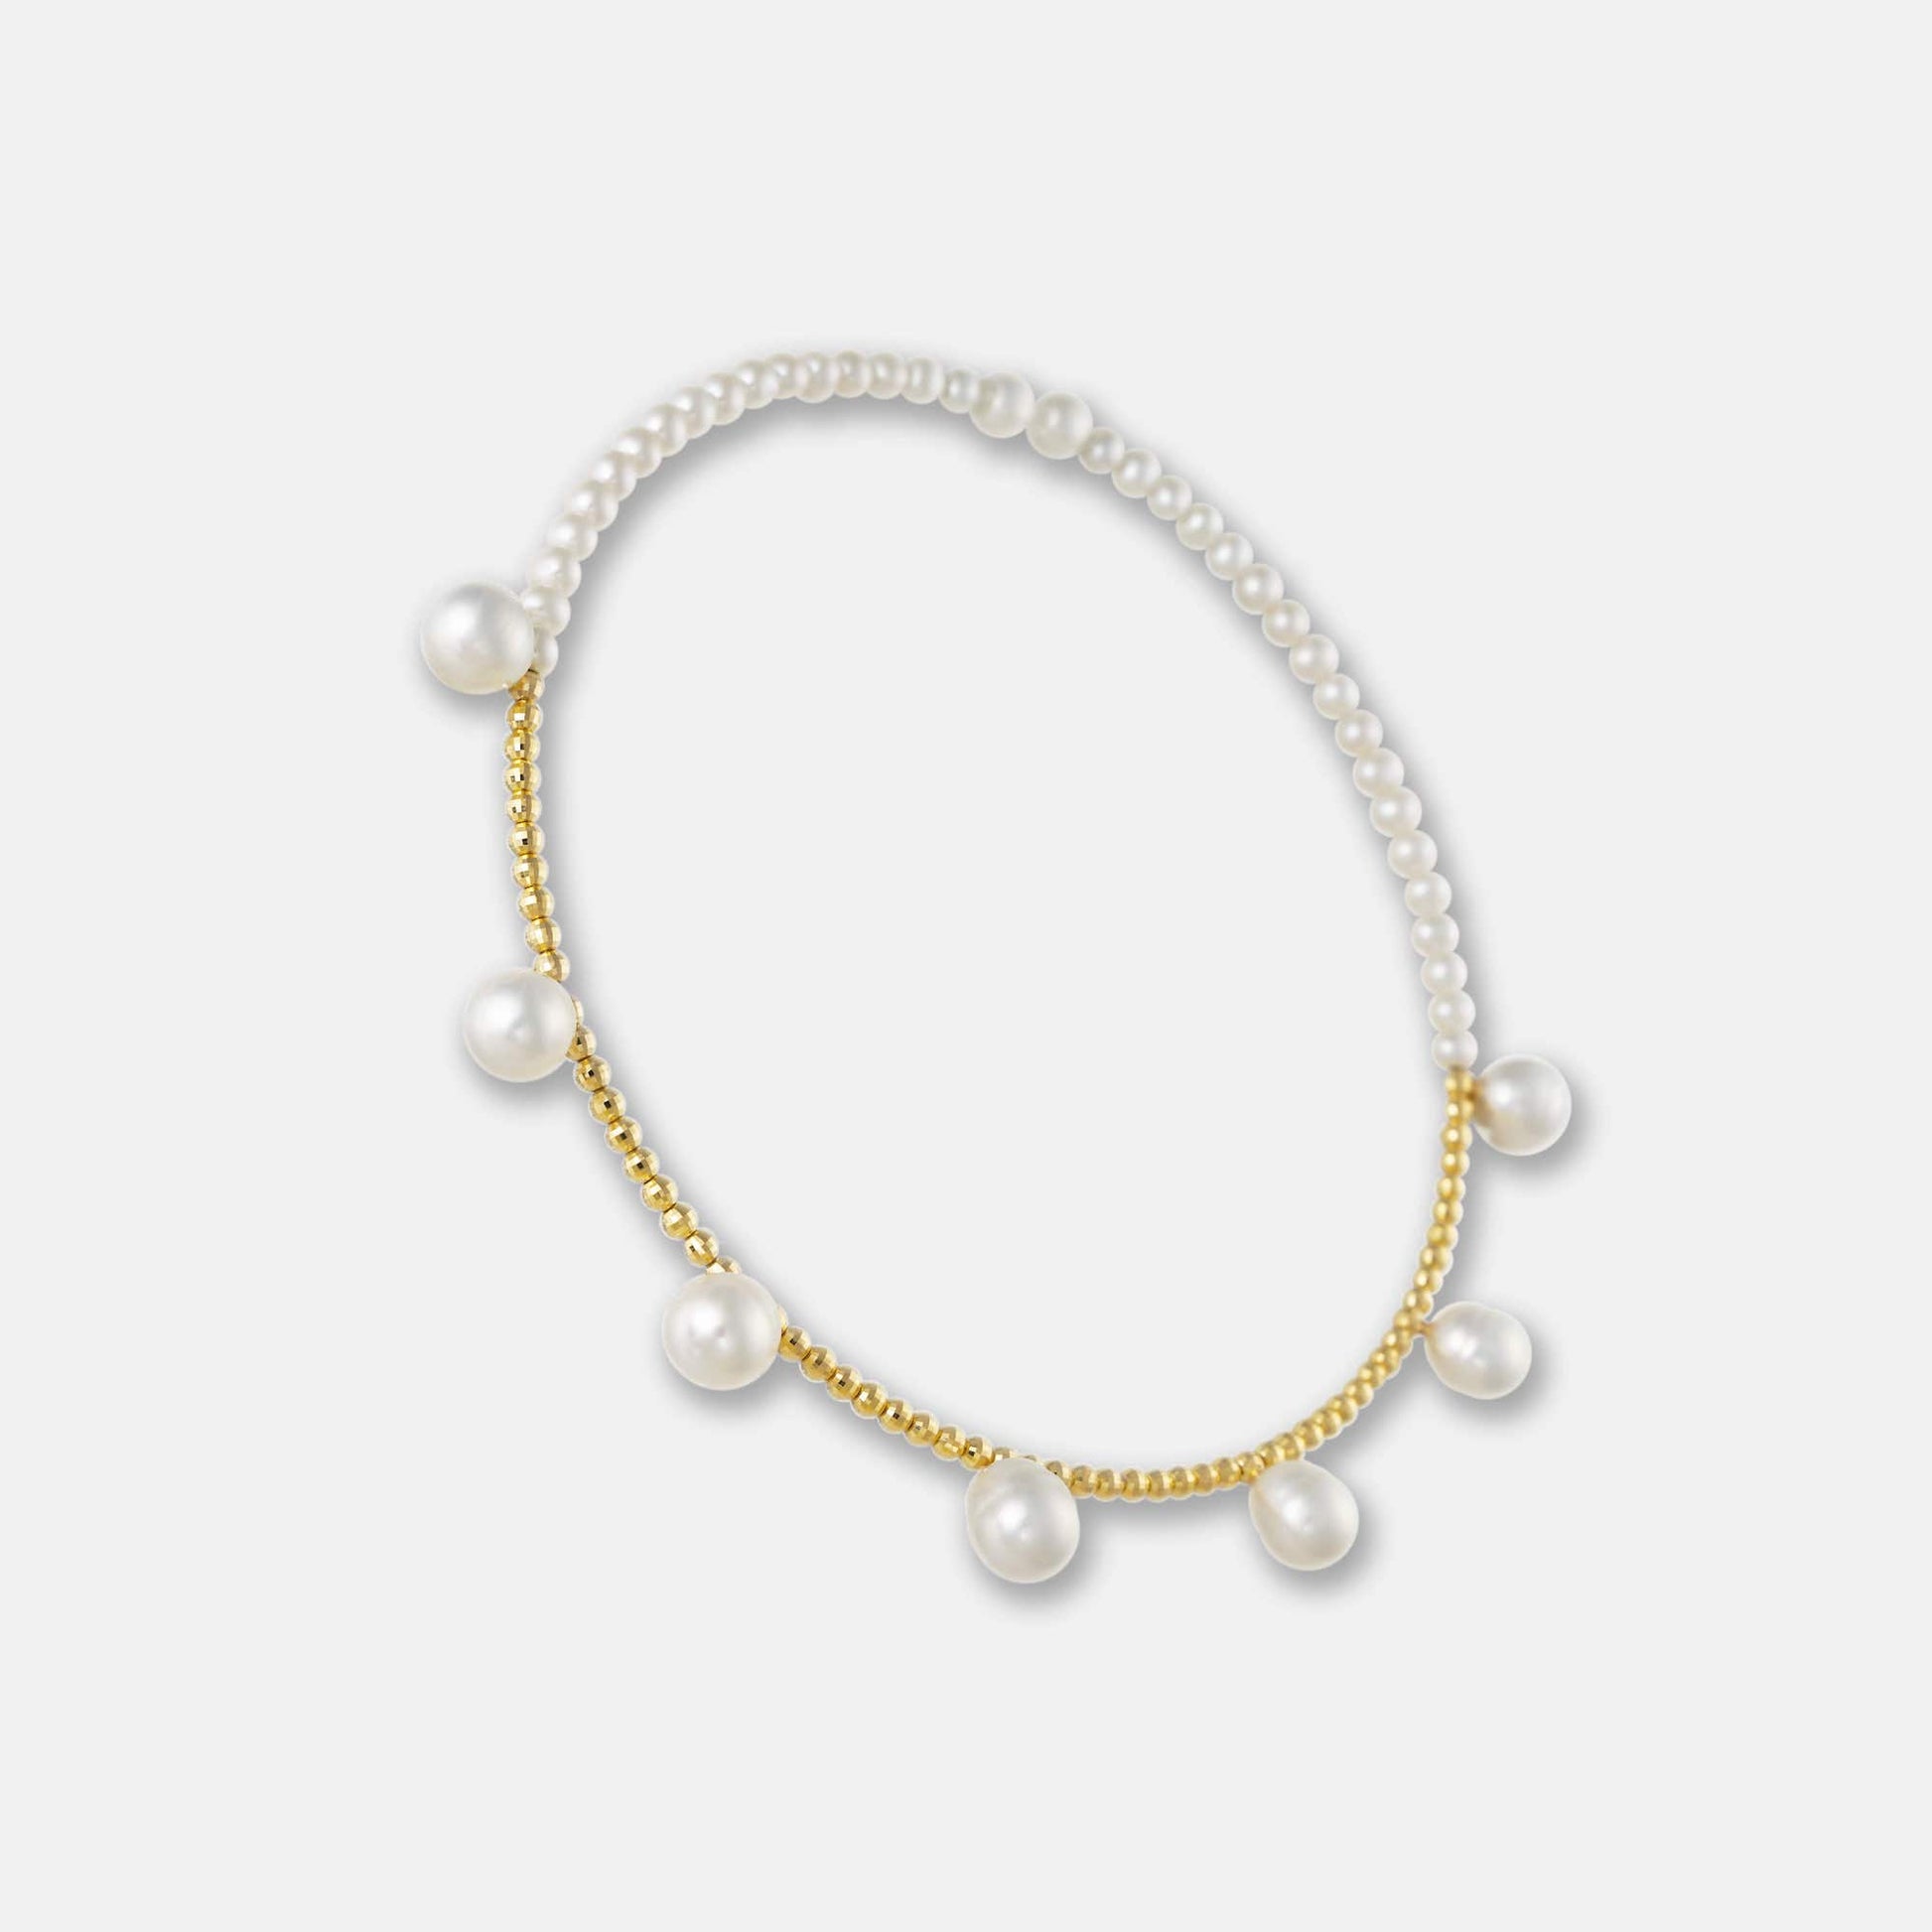 Elevate your style with a Pearl Dot x Gold Choker, showcasing a beautiful pearl necklace embellished with gold beads and pearls.